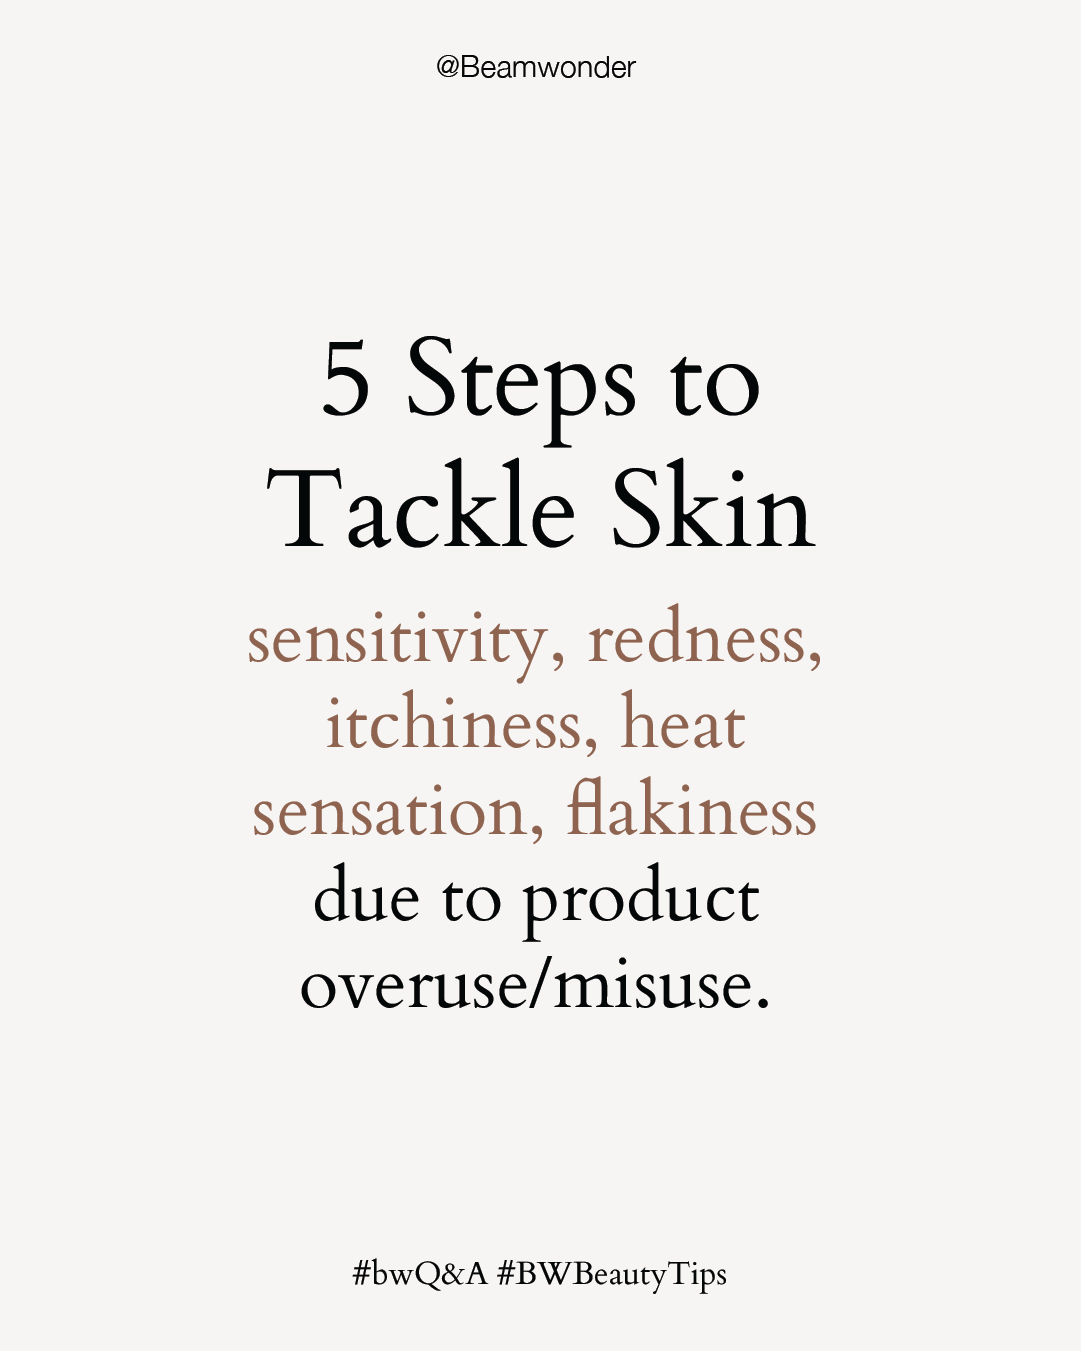 5 steps to tackle skin sensitivity due to product overuse/misuse